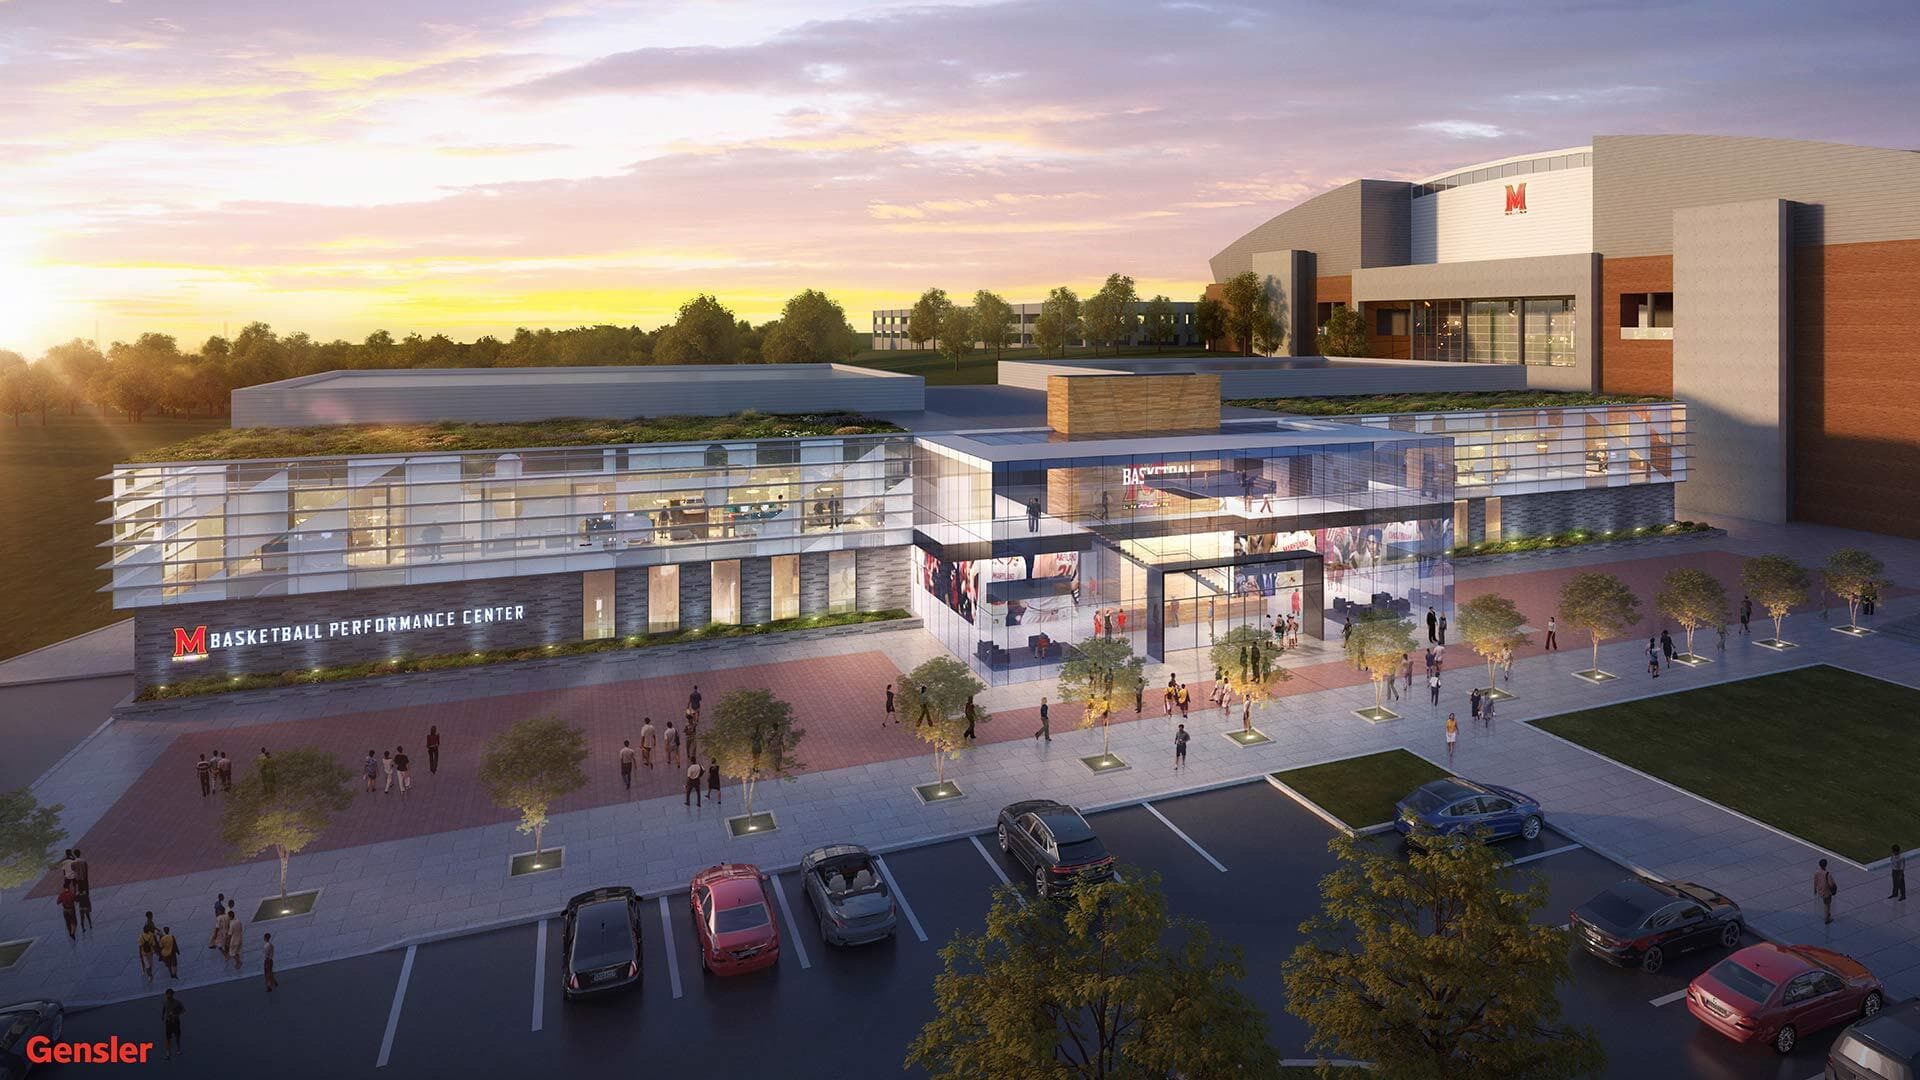 Rendering of exterior of new basketball practice facility next to Xfinity Center